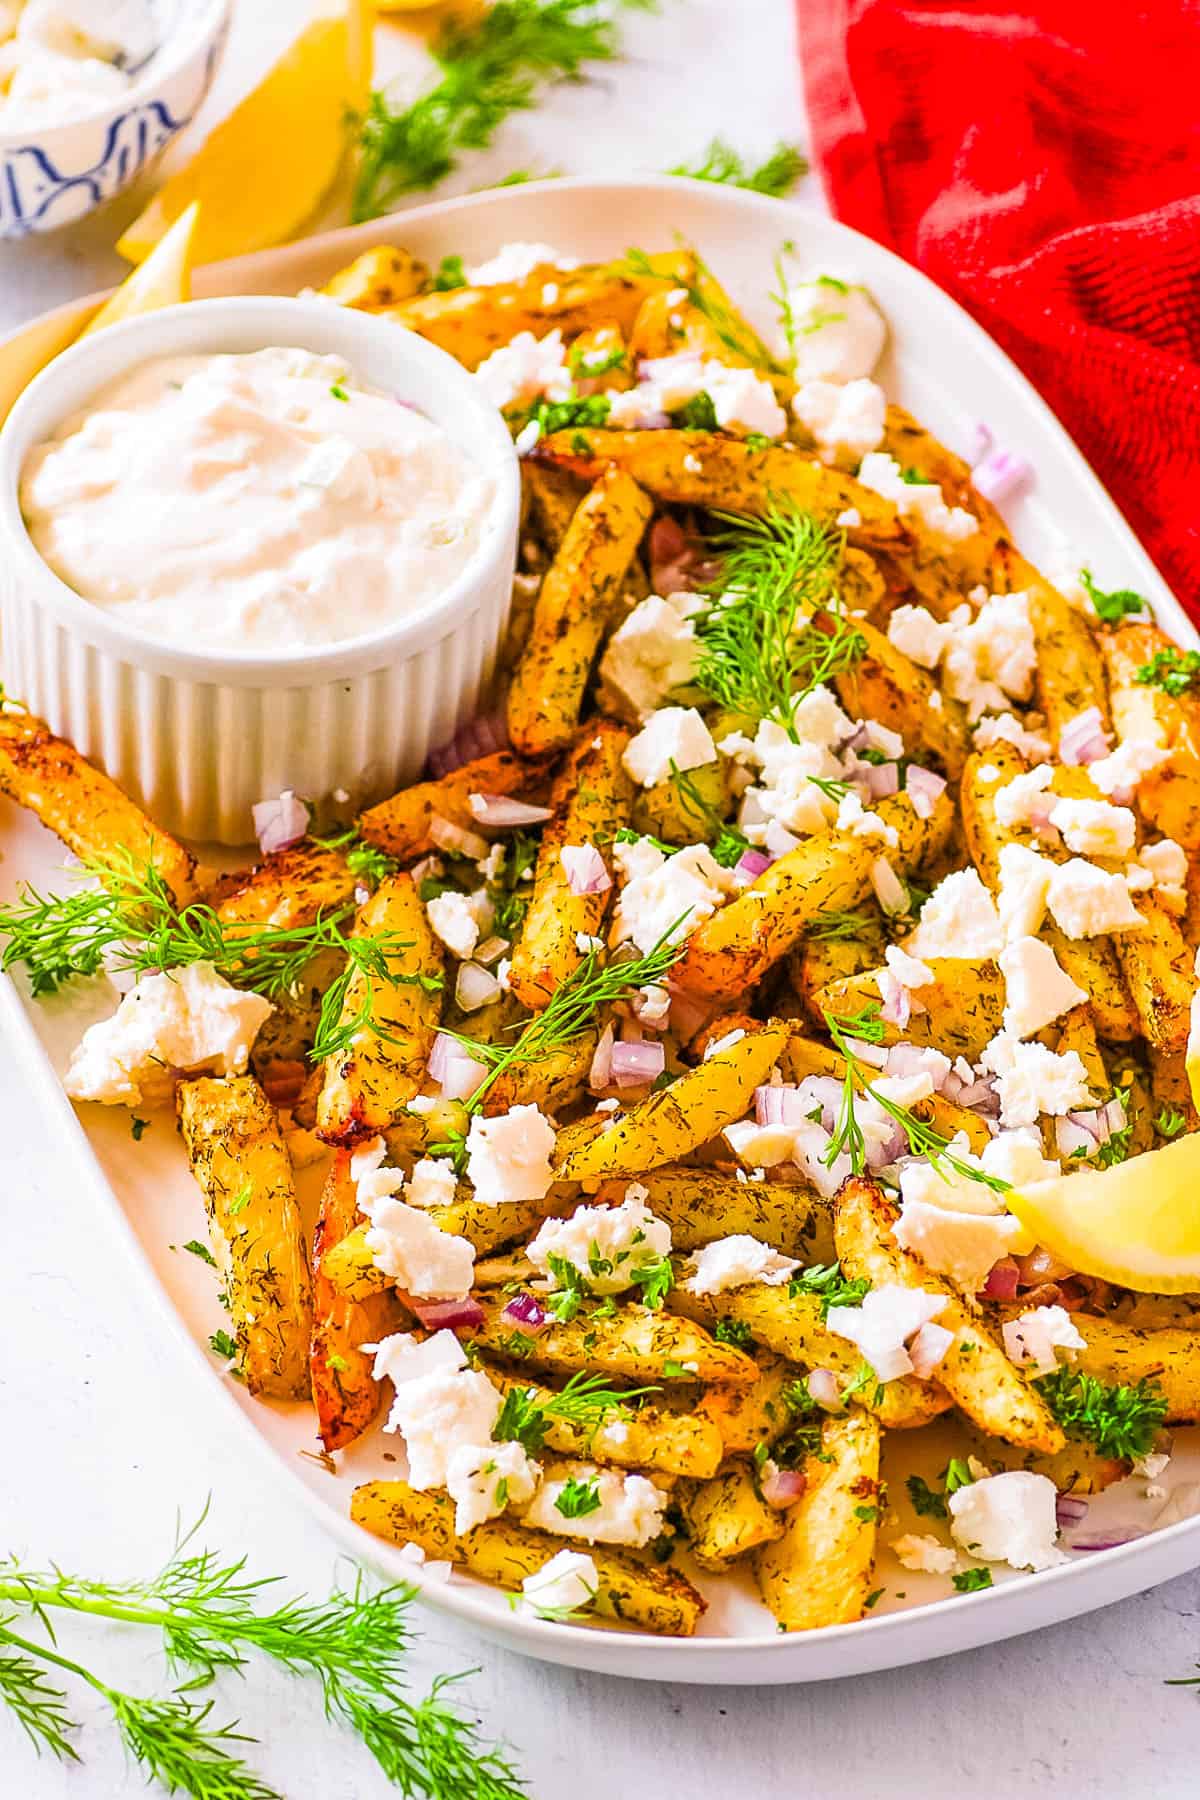 Easy Greek fries with feta, parsley, onions, and tzatziki dip on the side, served on a white plate.